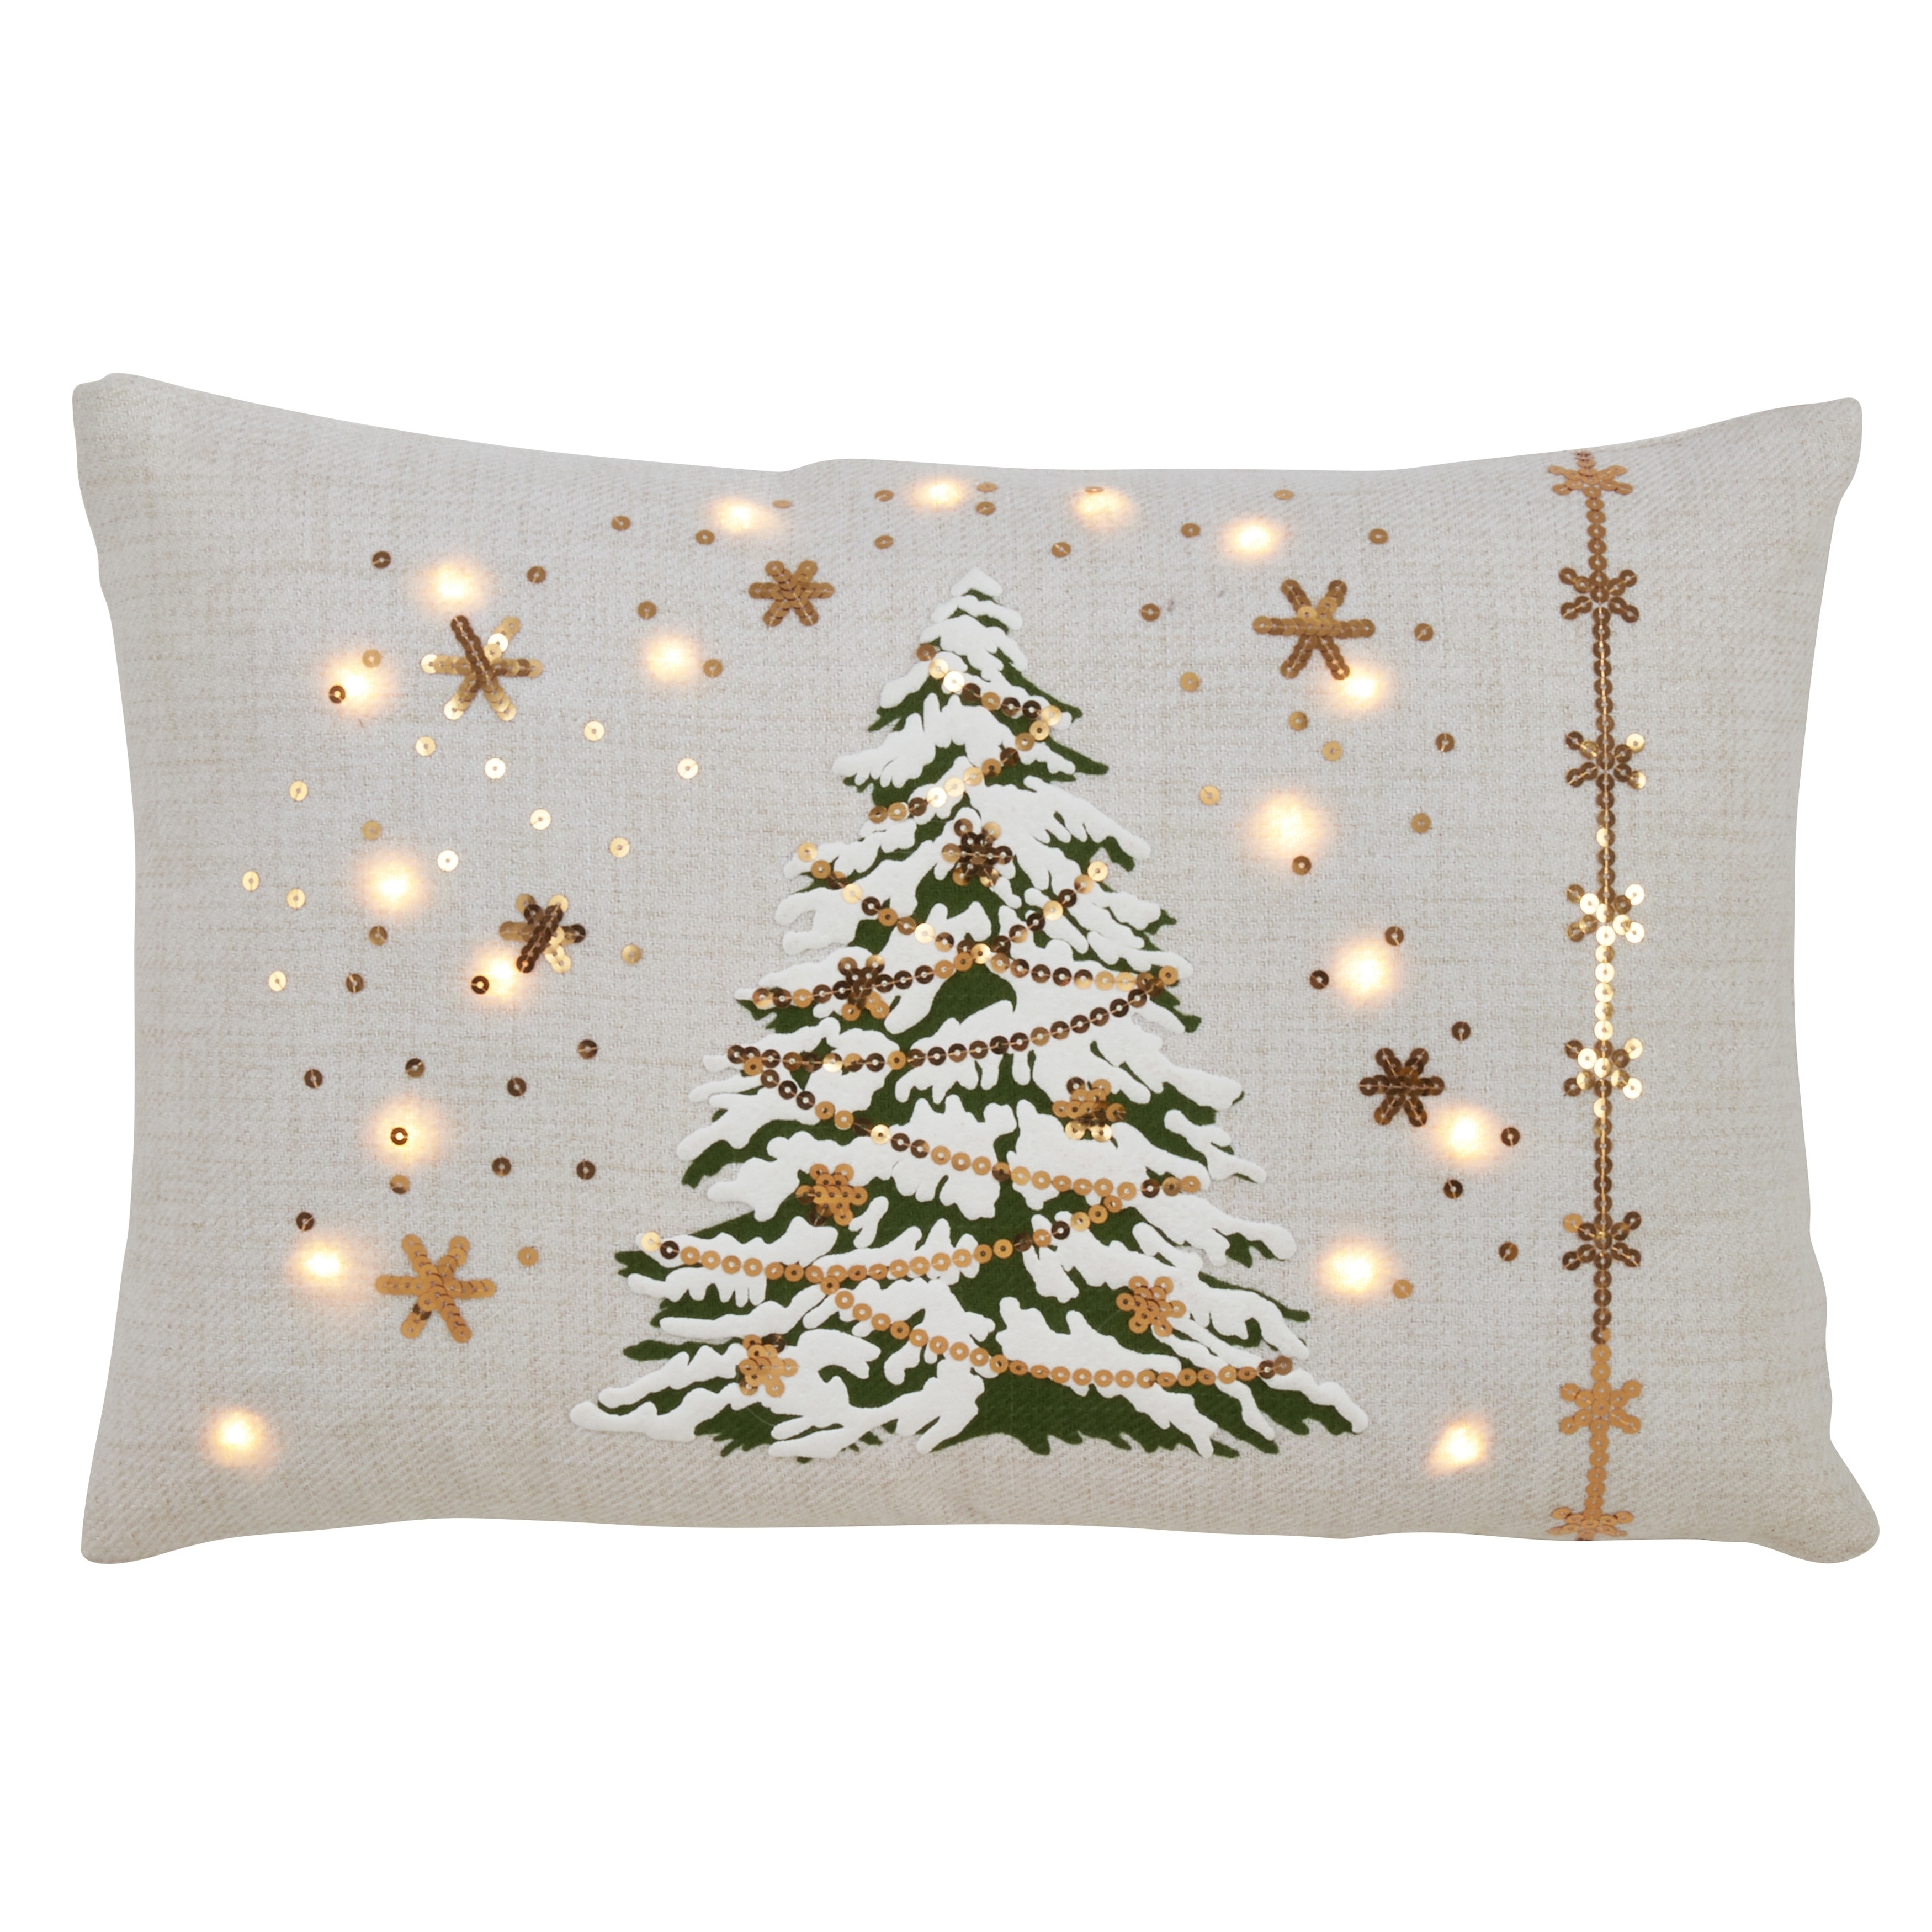 https://ak1.ostkcdn.com/images/products/29826748/Christmas-Tree-Throw-Pillow-With-LED-Lights-1d8a0575-4faf-4db0-8acf-85c5118a4d10.jpg